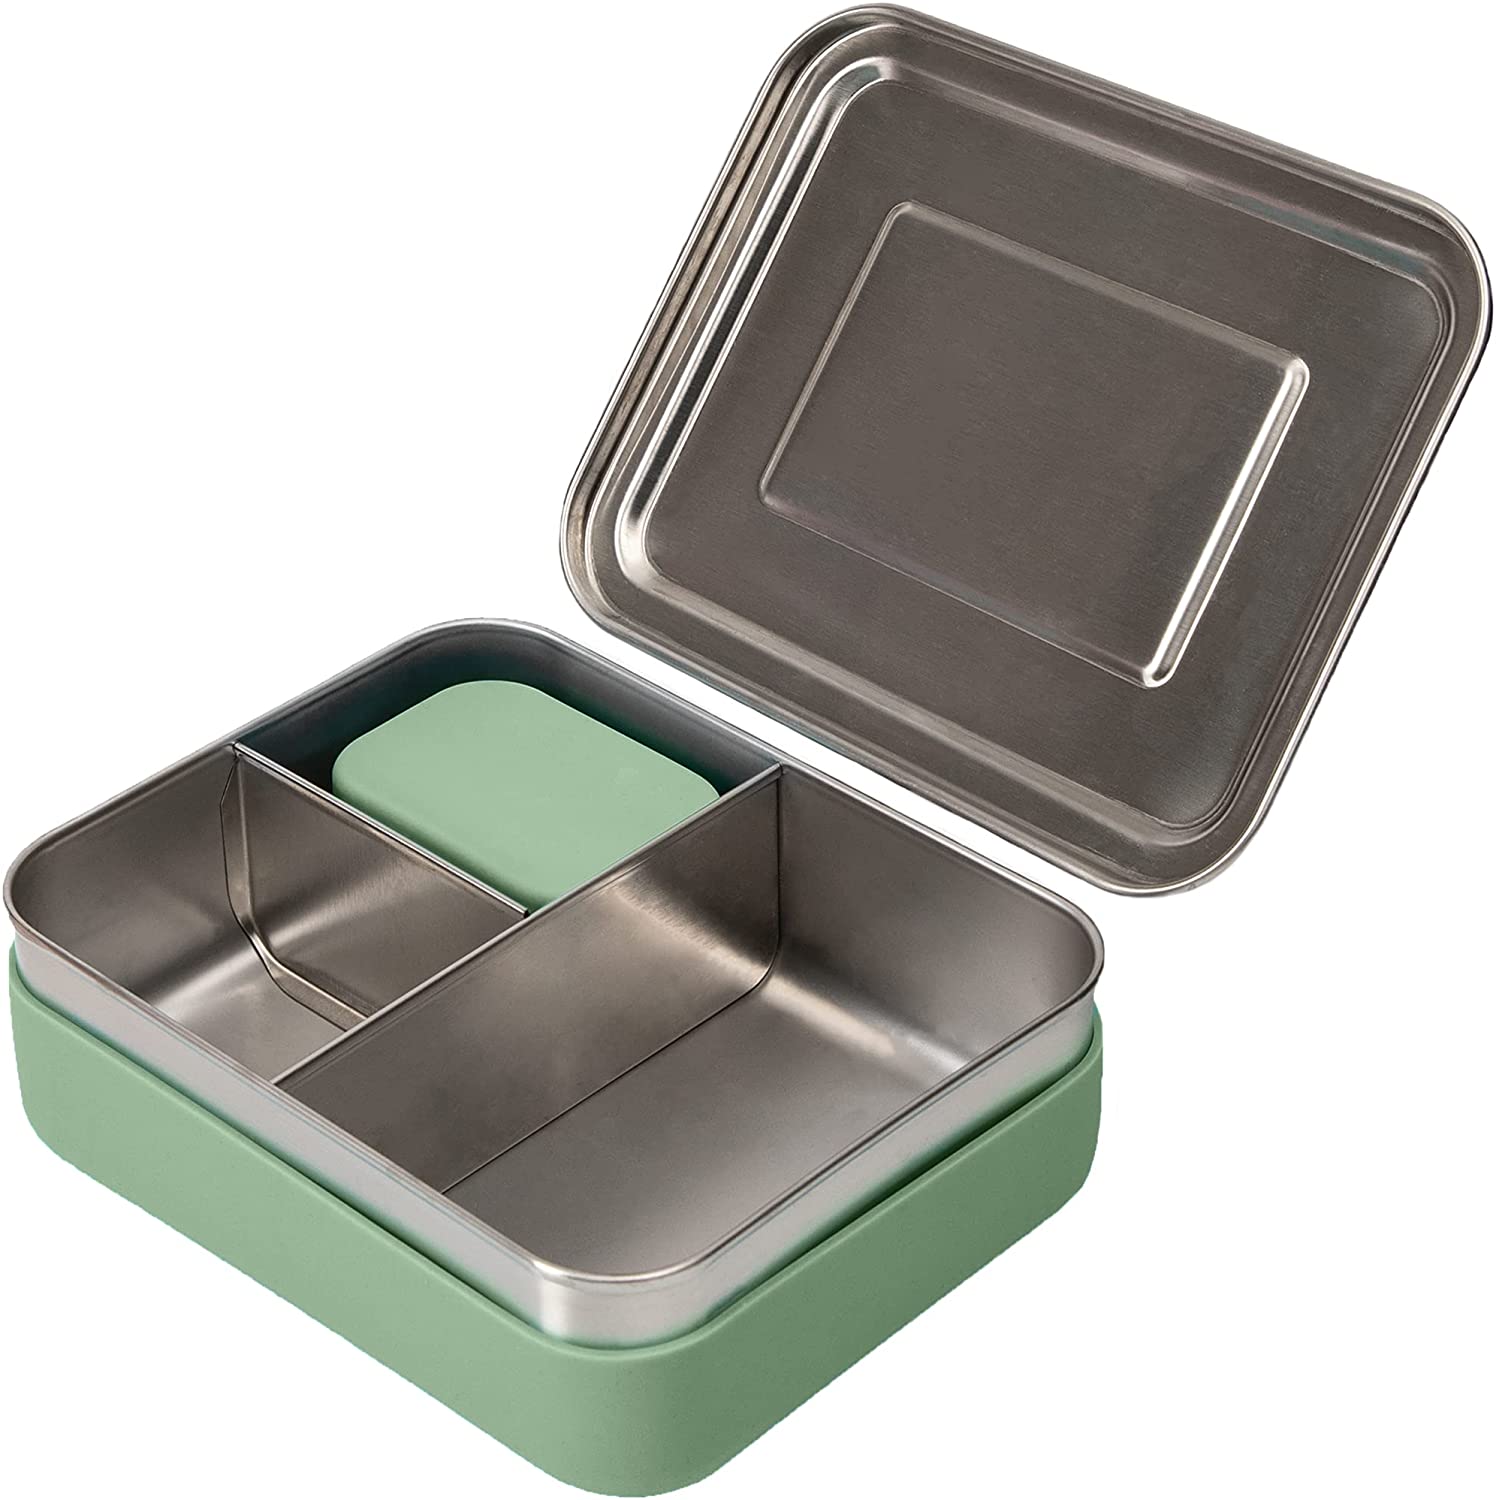 Stainless Steel Lunch Box & Bento Box, 23 oz Food Box